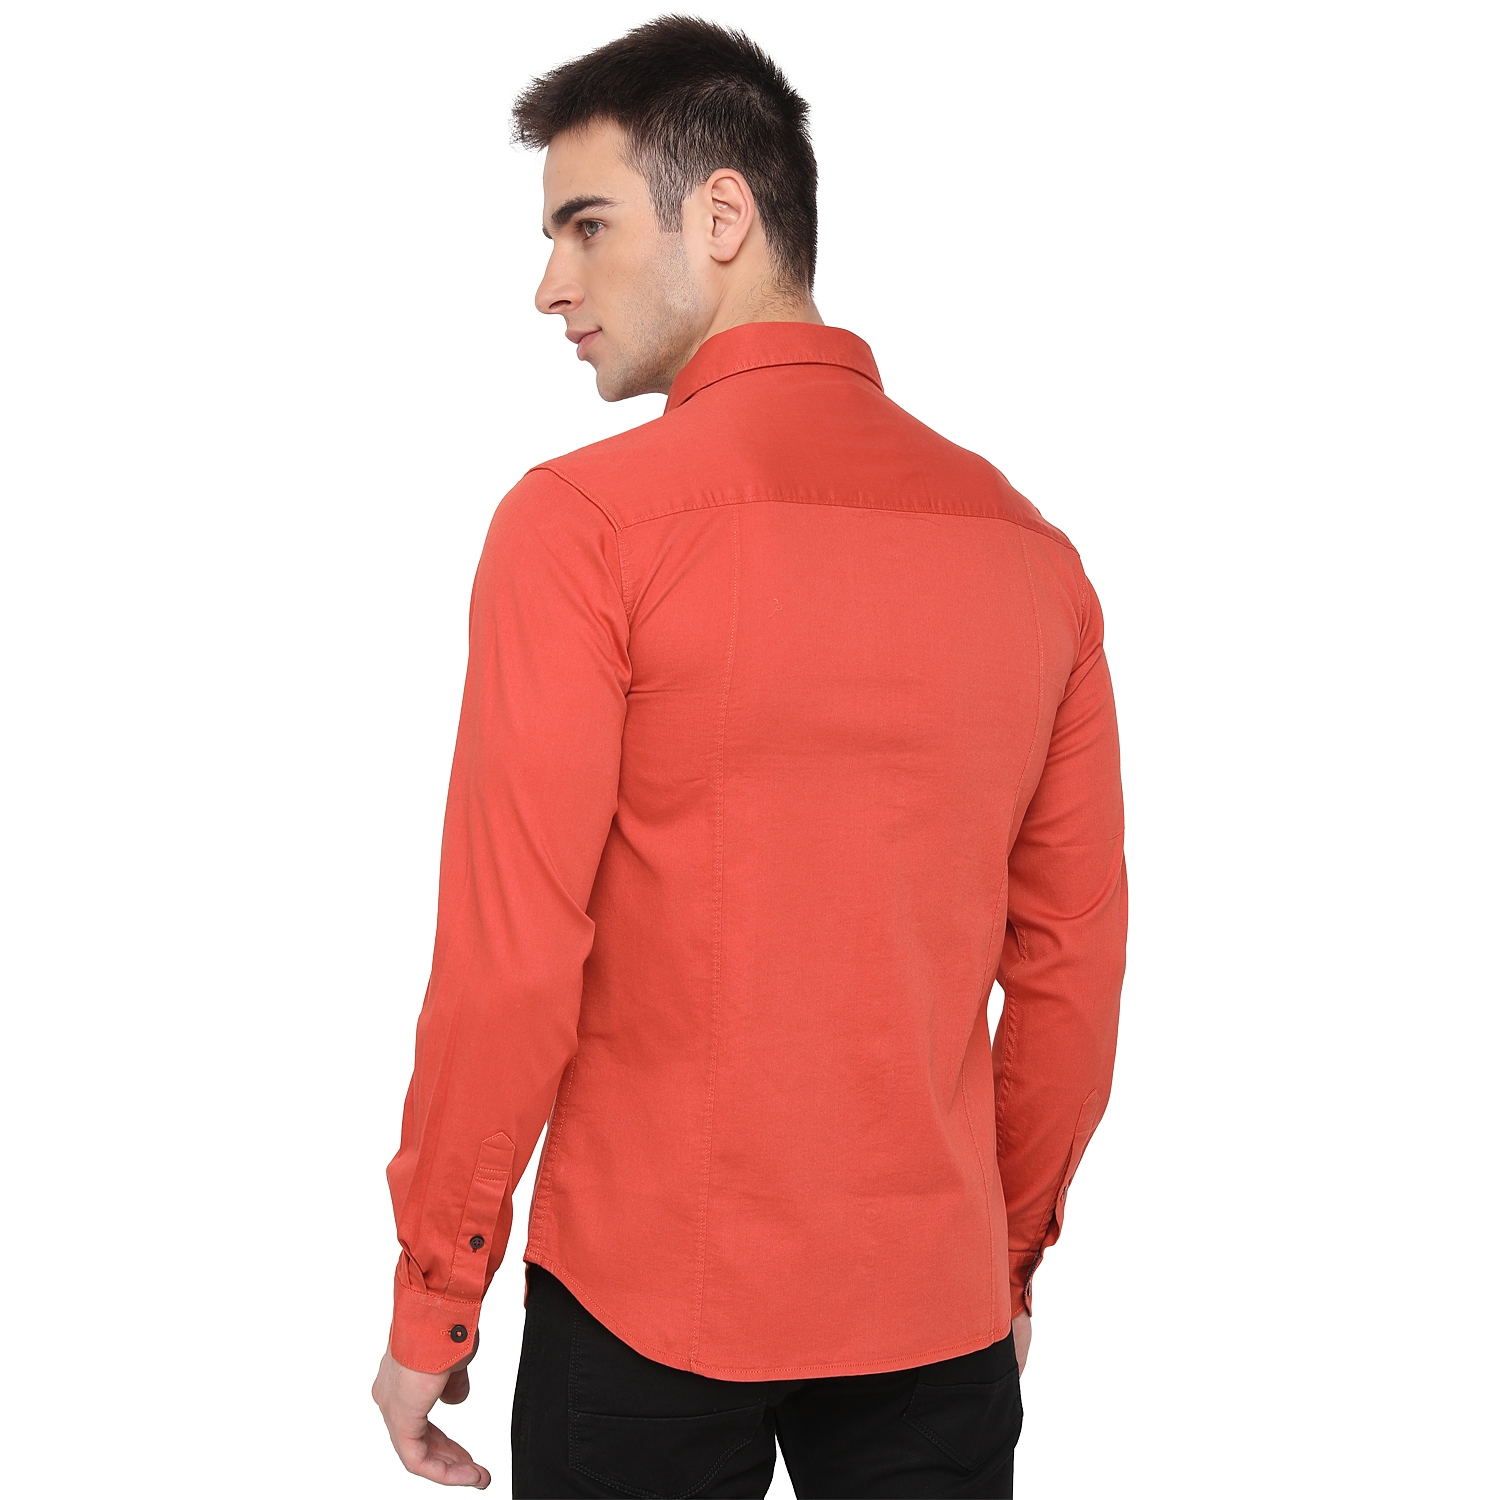 Greenfibre | Spicy Orange Solid Slim Fit Casual Shirt | Greenfibre 1